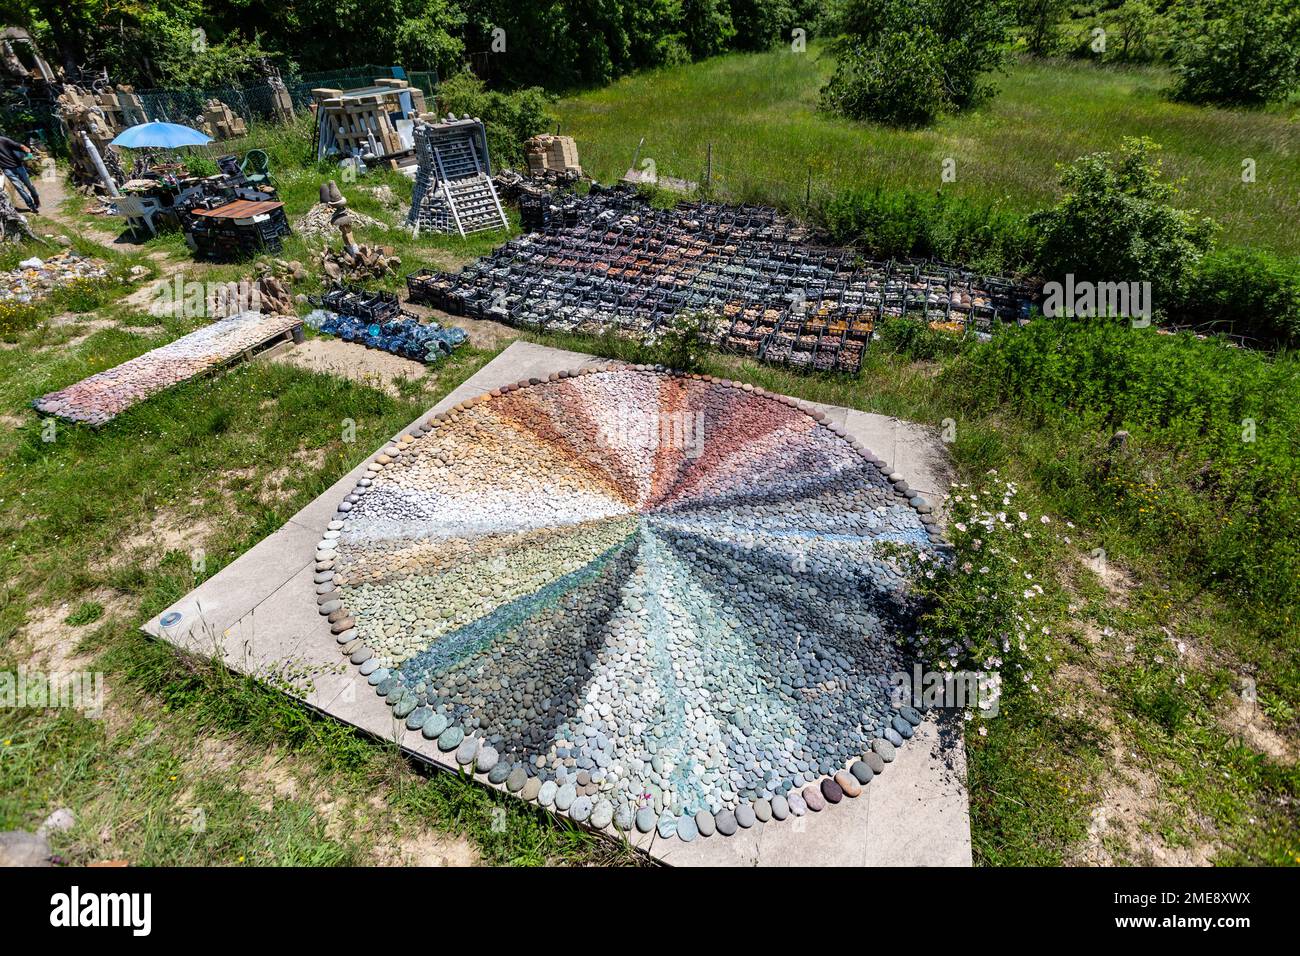 Mosaic of naturally-coloured stones at the magical Dreamwoods Park, hidden in the hills of Tuscany, designed by German artist Deva Manfred, Italy. Stock Photo